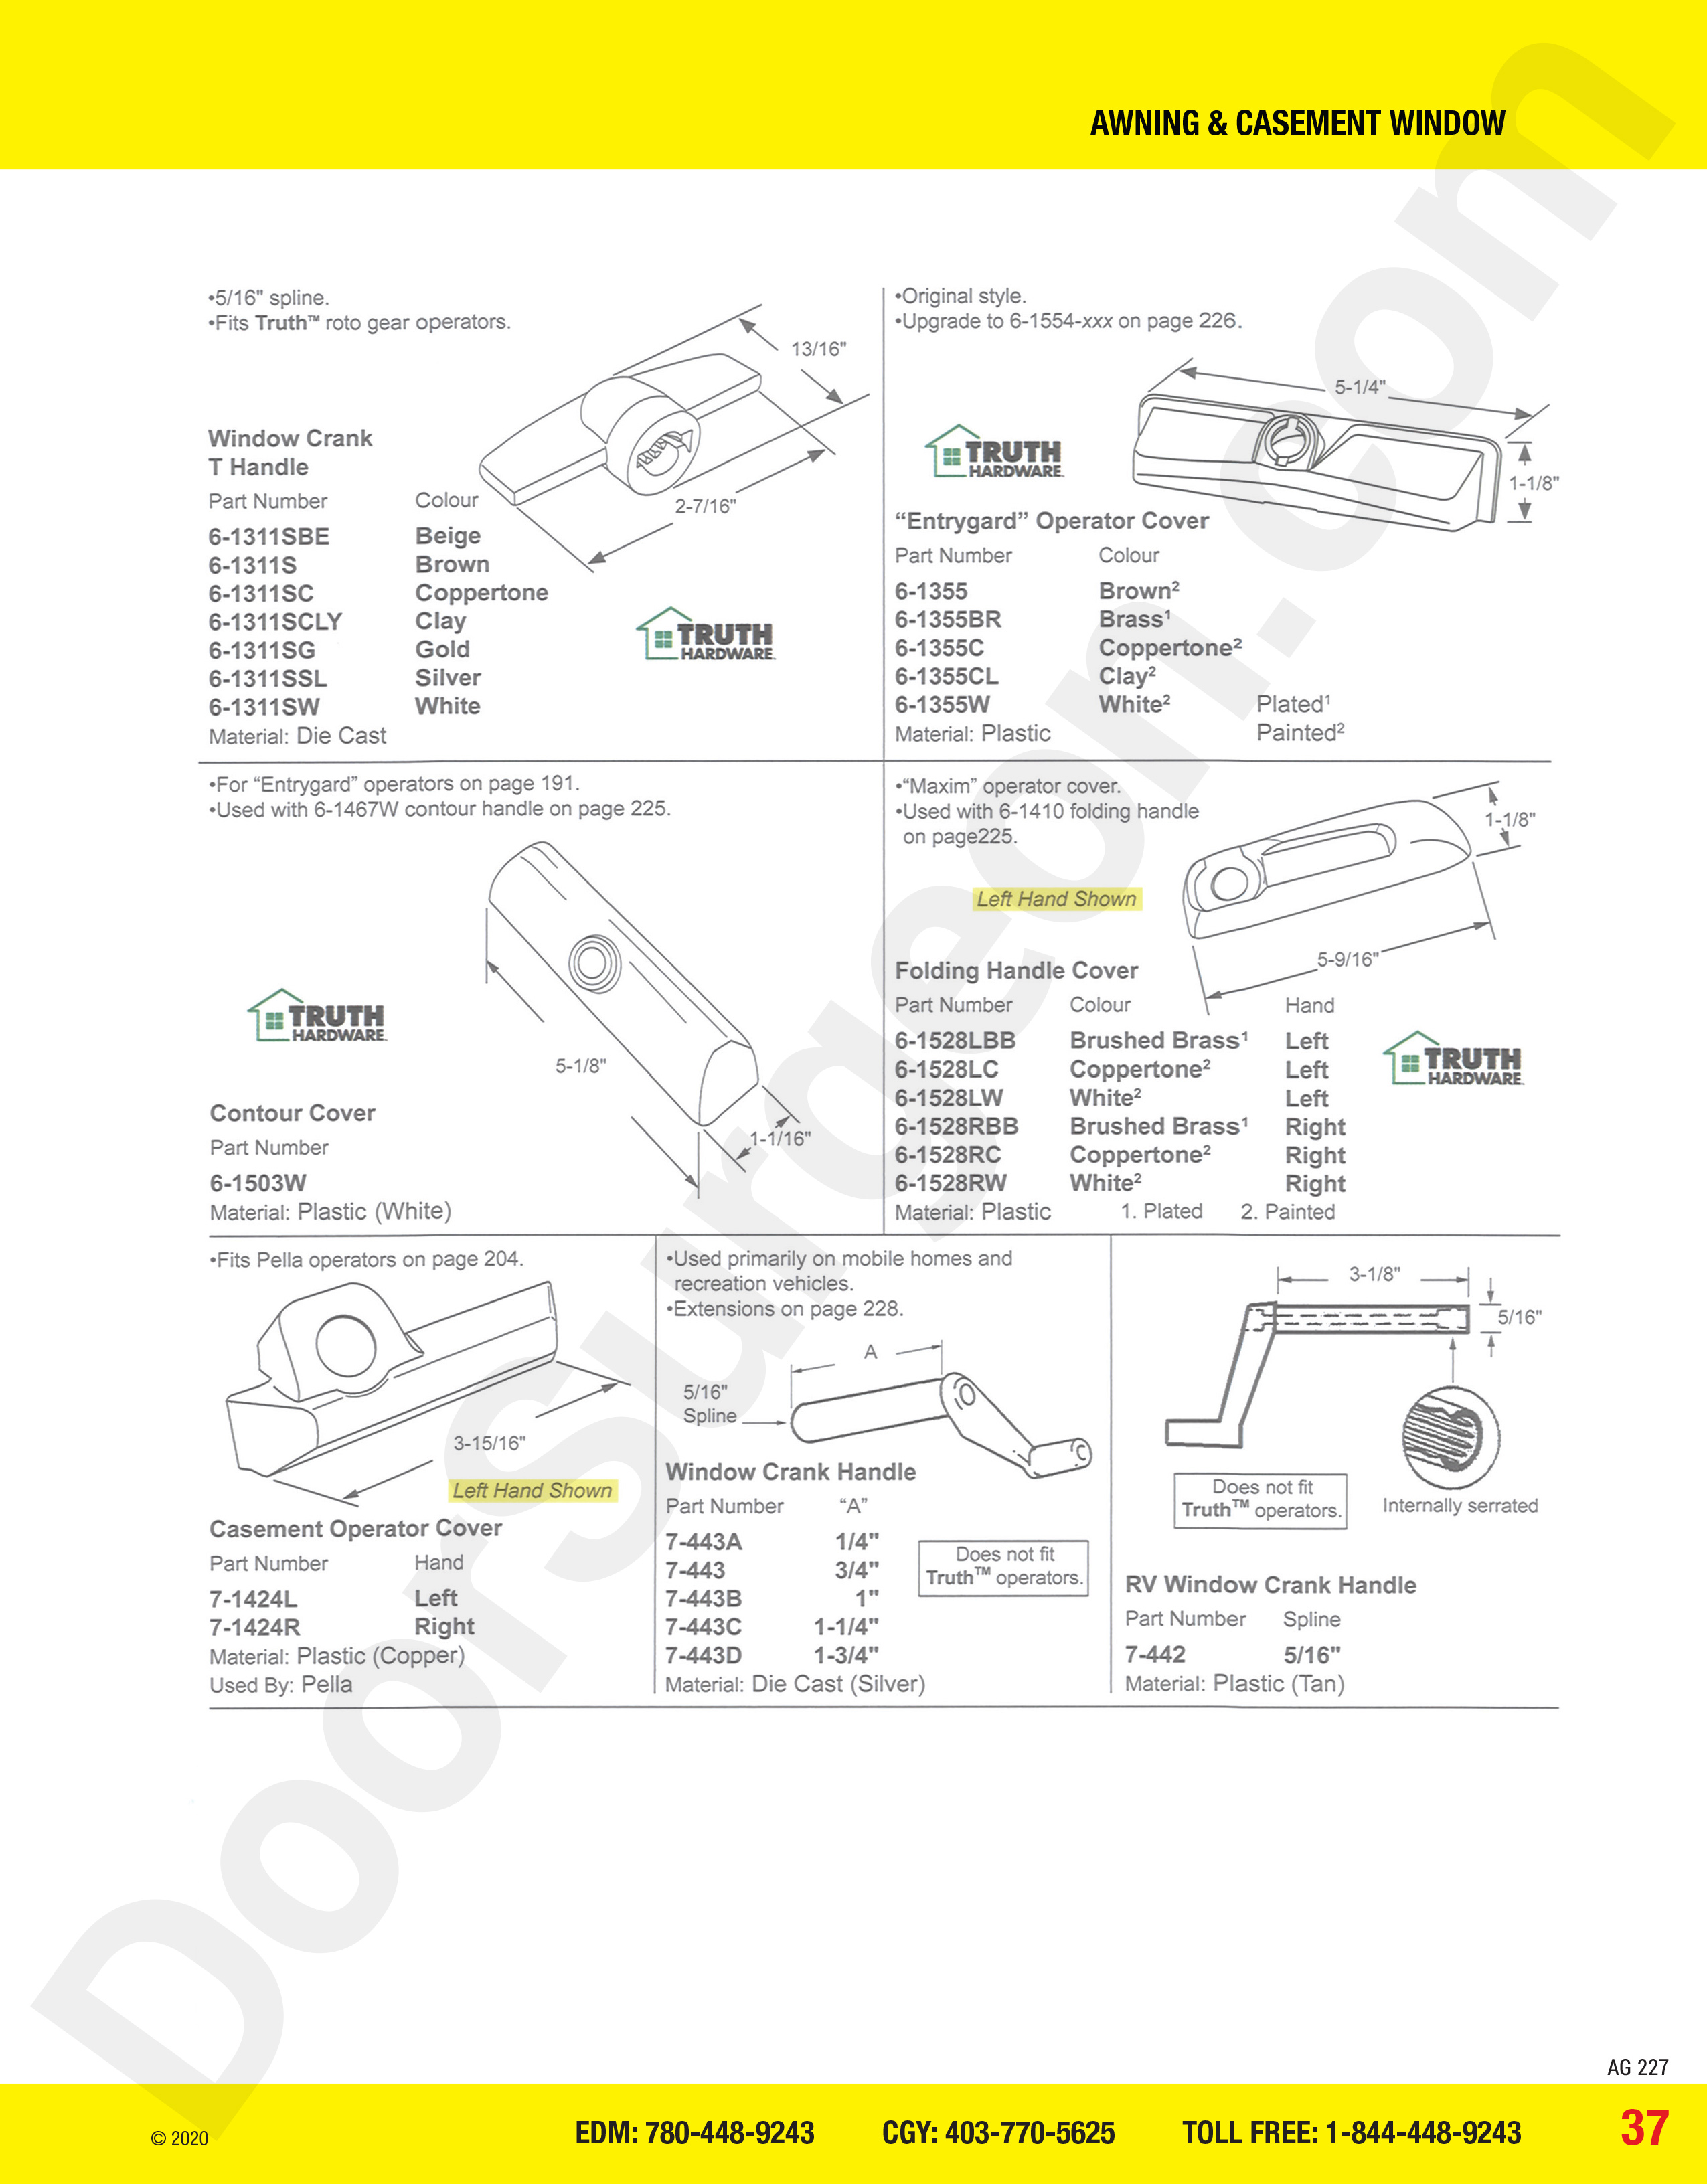 awning and casement window parts for covers and handles